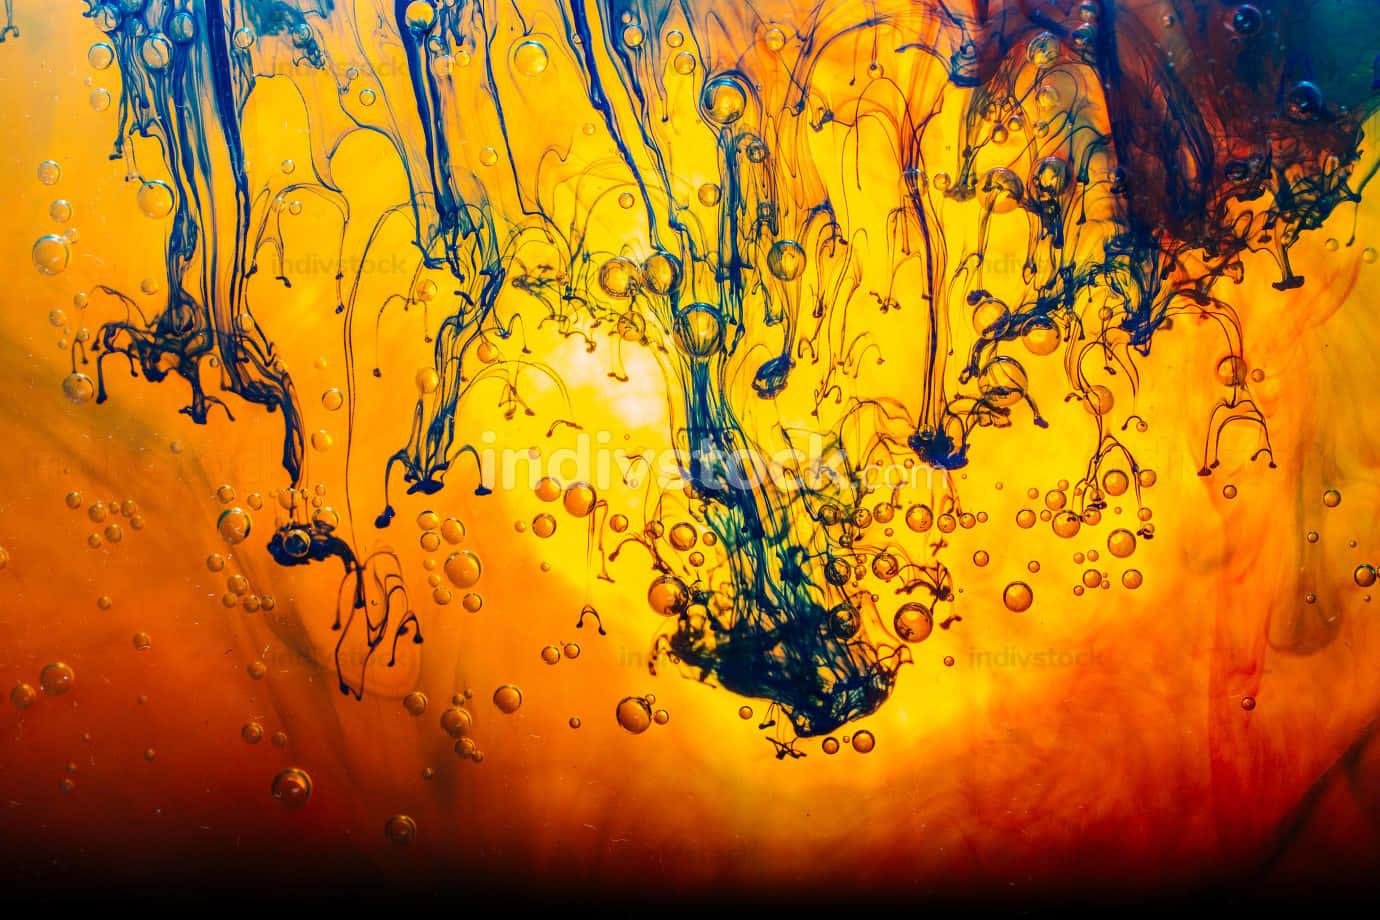 A Colorful Liquid With Orange And Blue Splashes Wallpaper